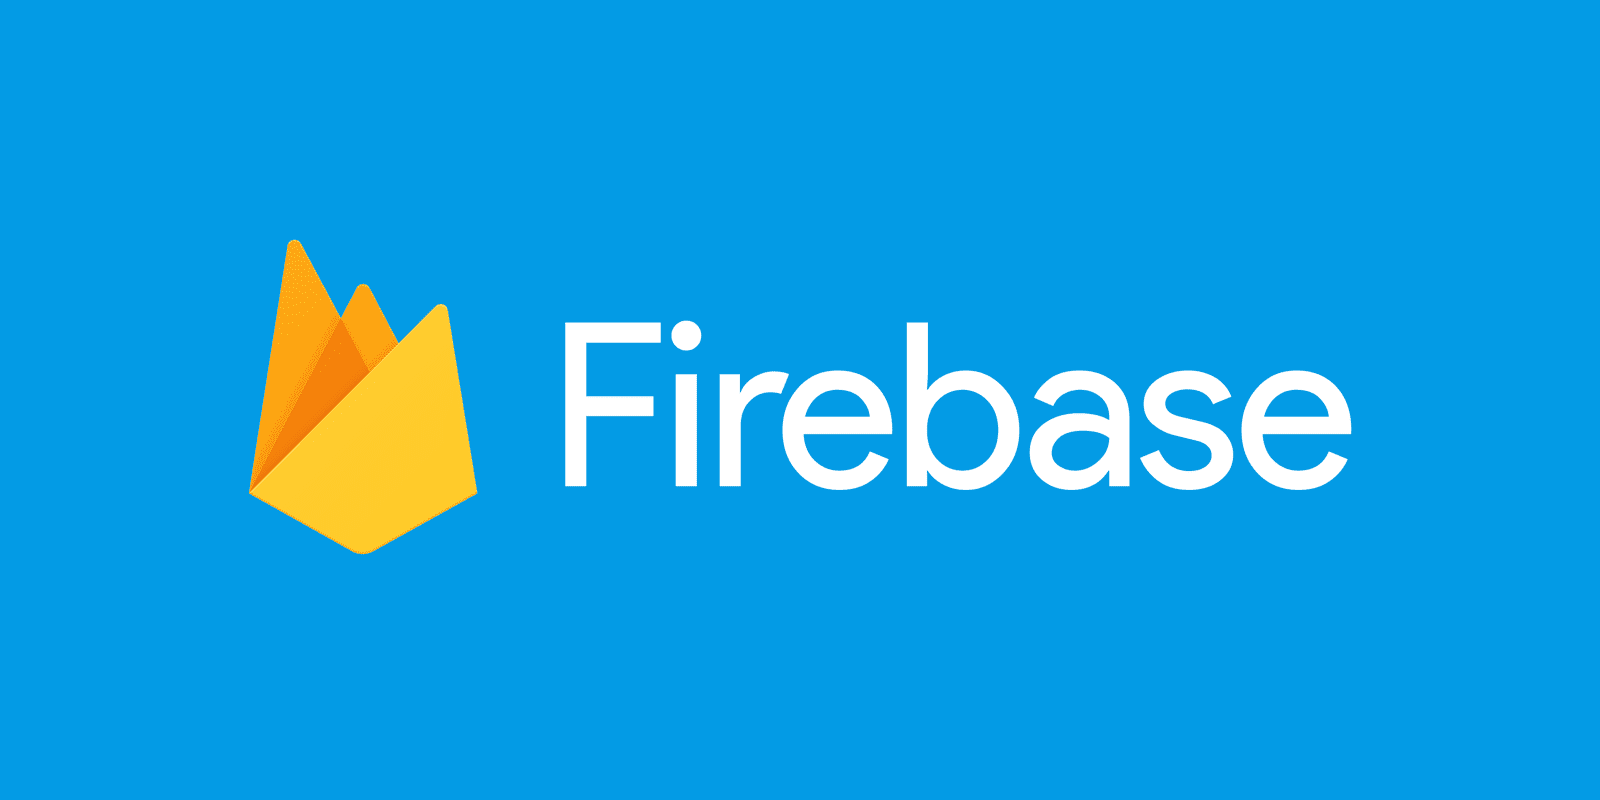 Can I earn money from Firebase?